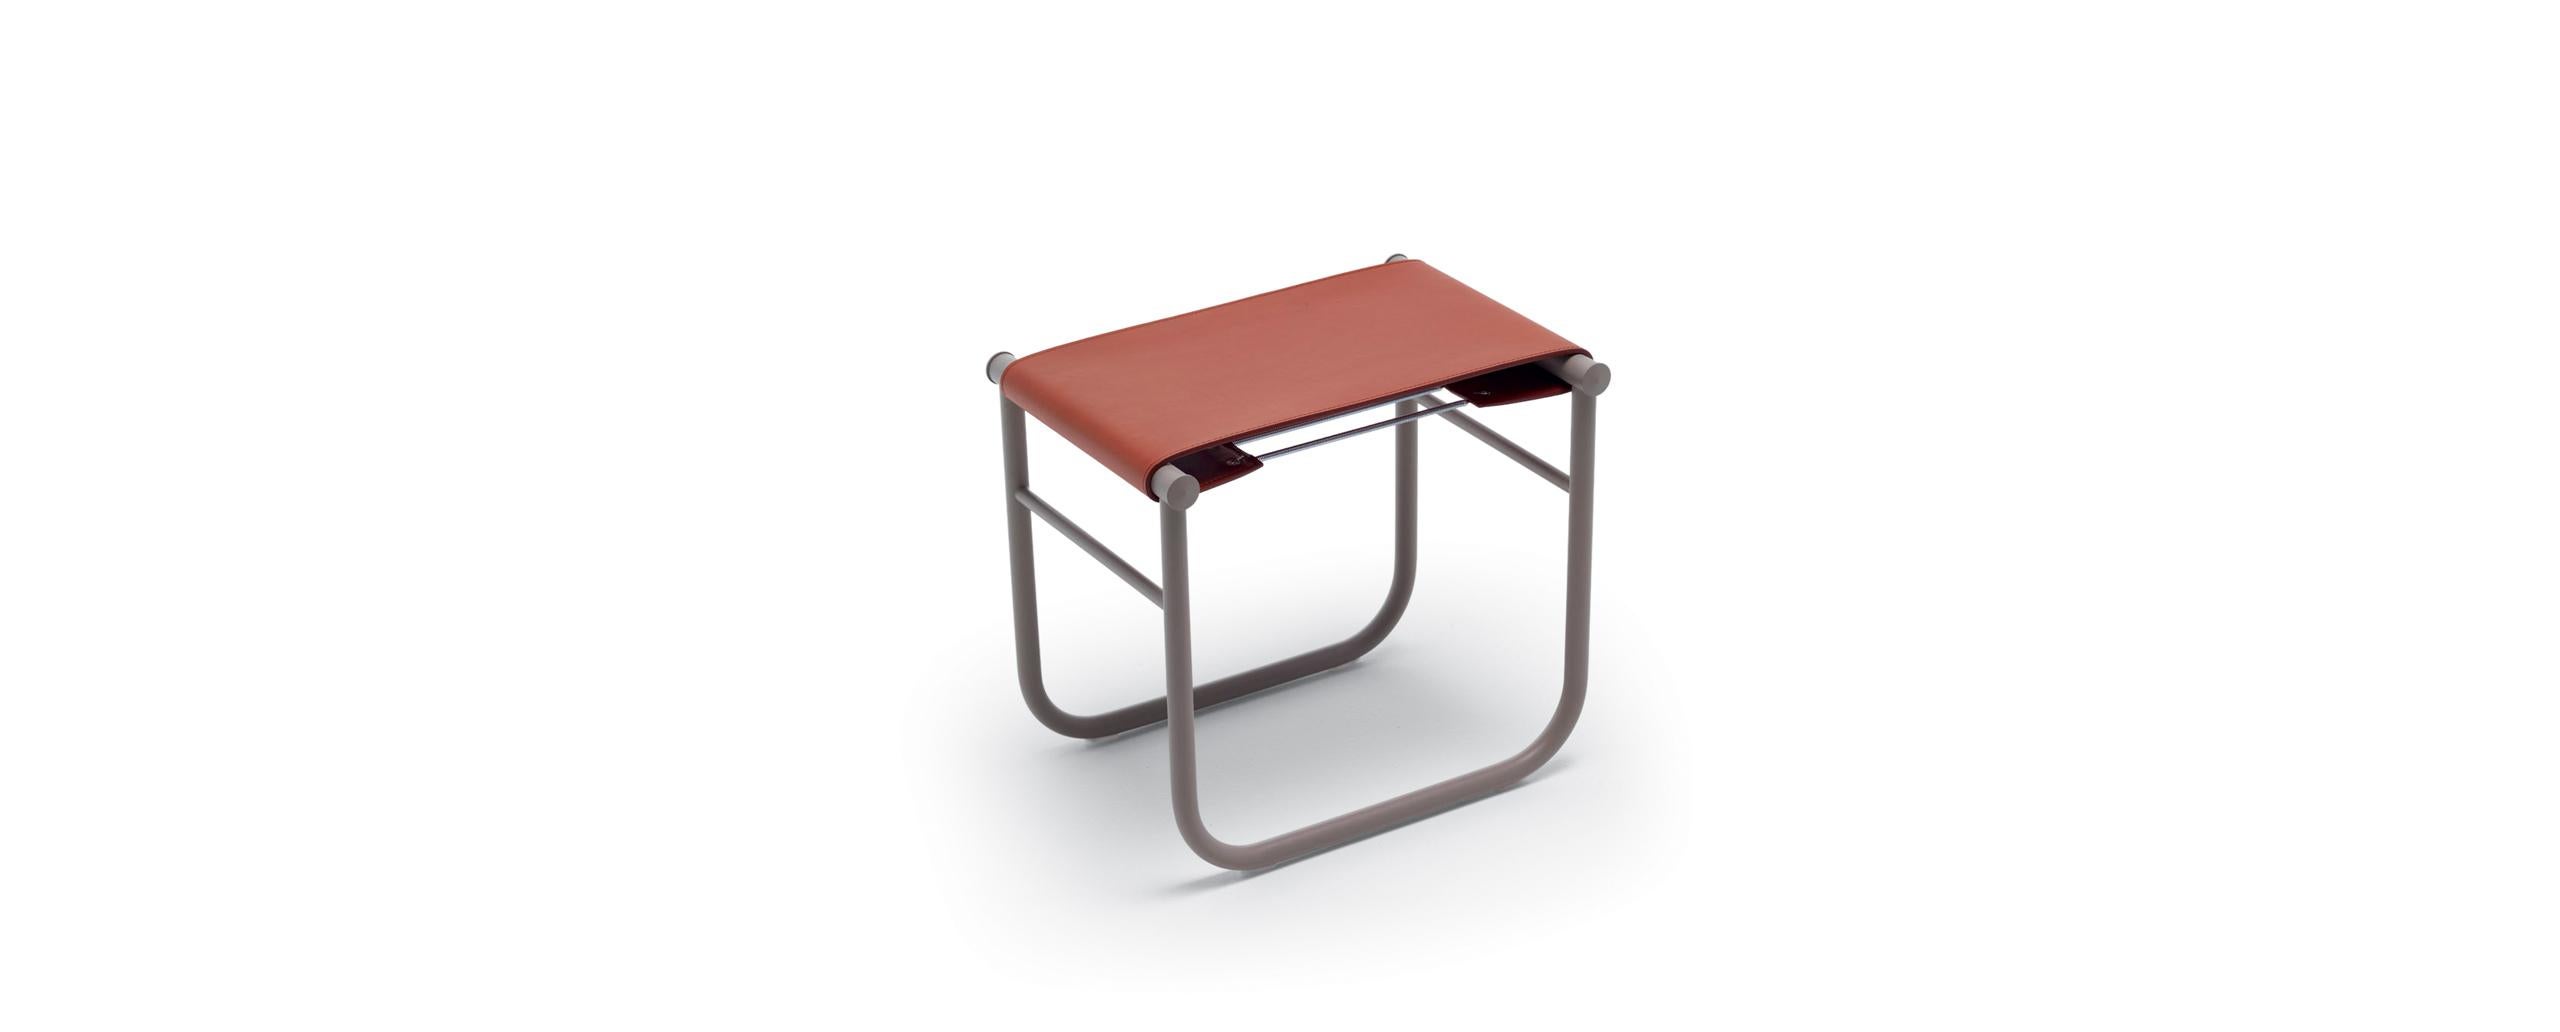 Stool designed by Charlotte Perriand in 1927. Relaunched by Cassina in 1973/2014. Manufactured by Cassina in Italy.

Designed by Charlotte Perriand and part of the LC collection by Le Corbusier, Pierre Jeanneret and Charlotte Perriand.

A stool with